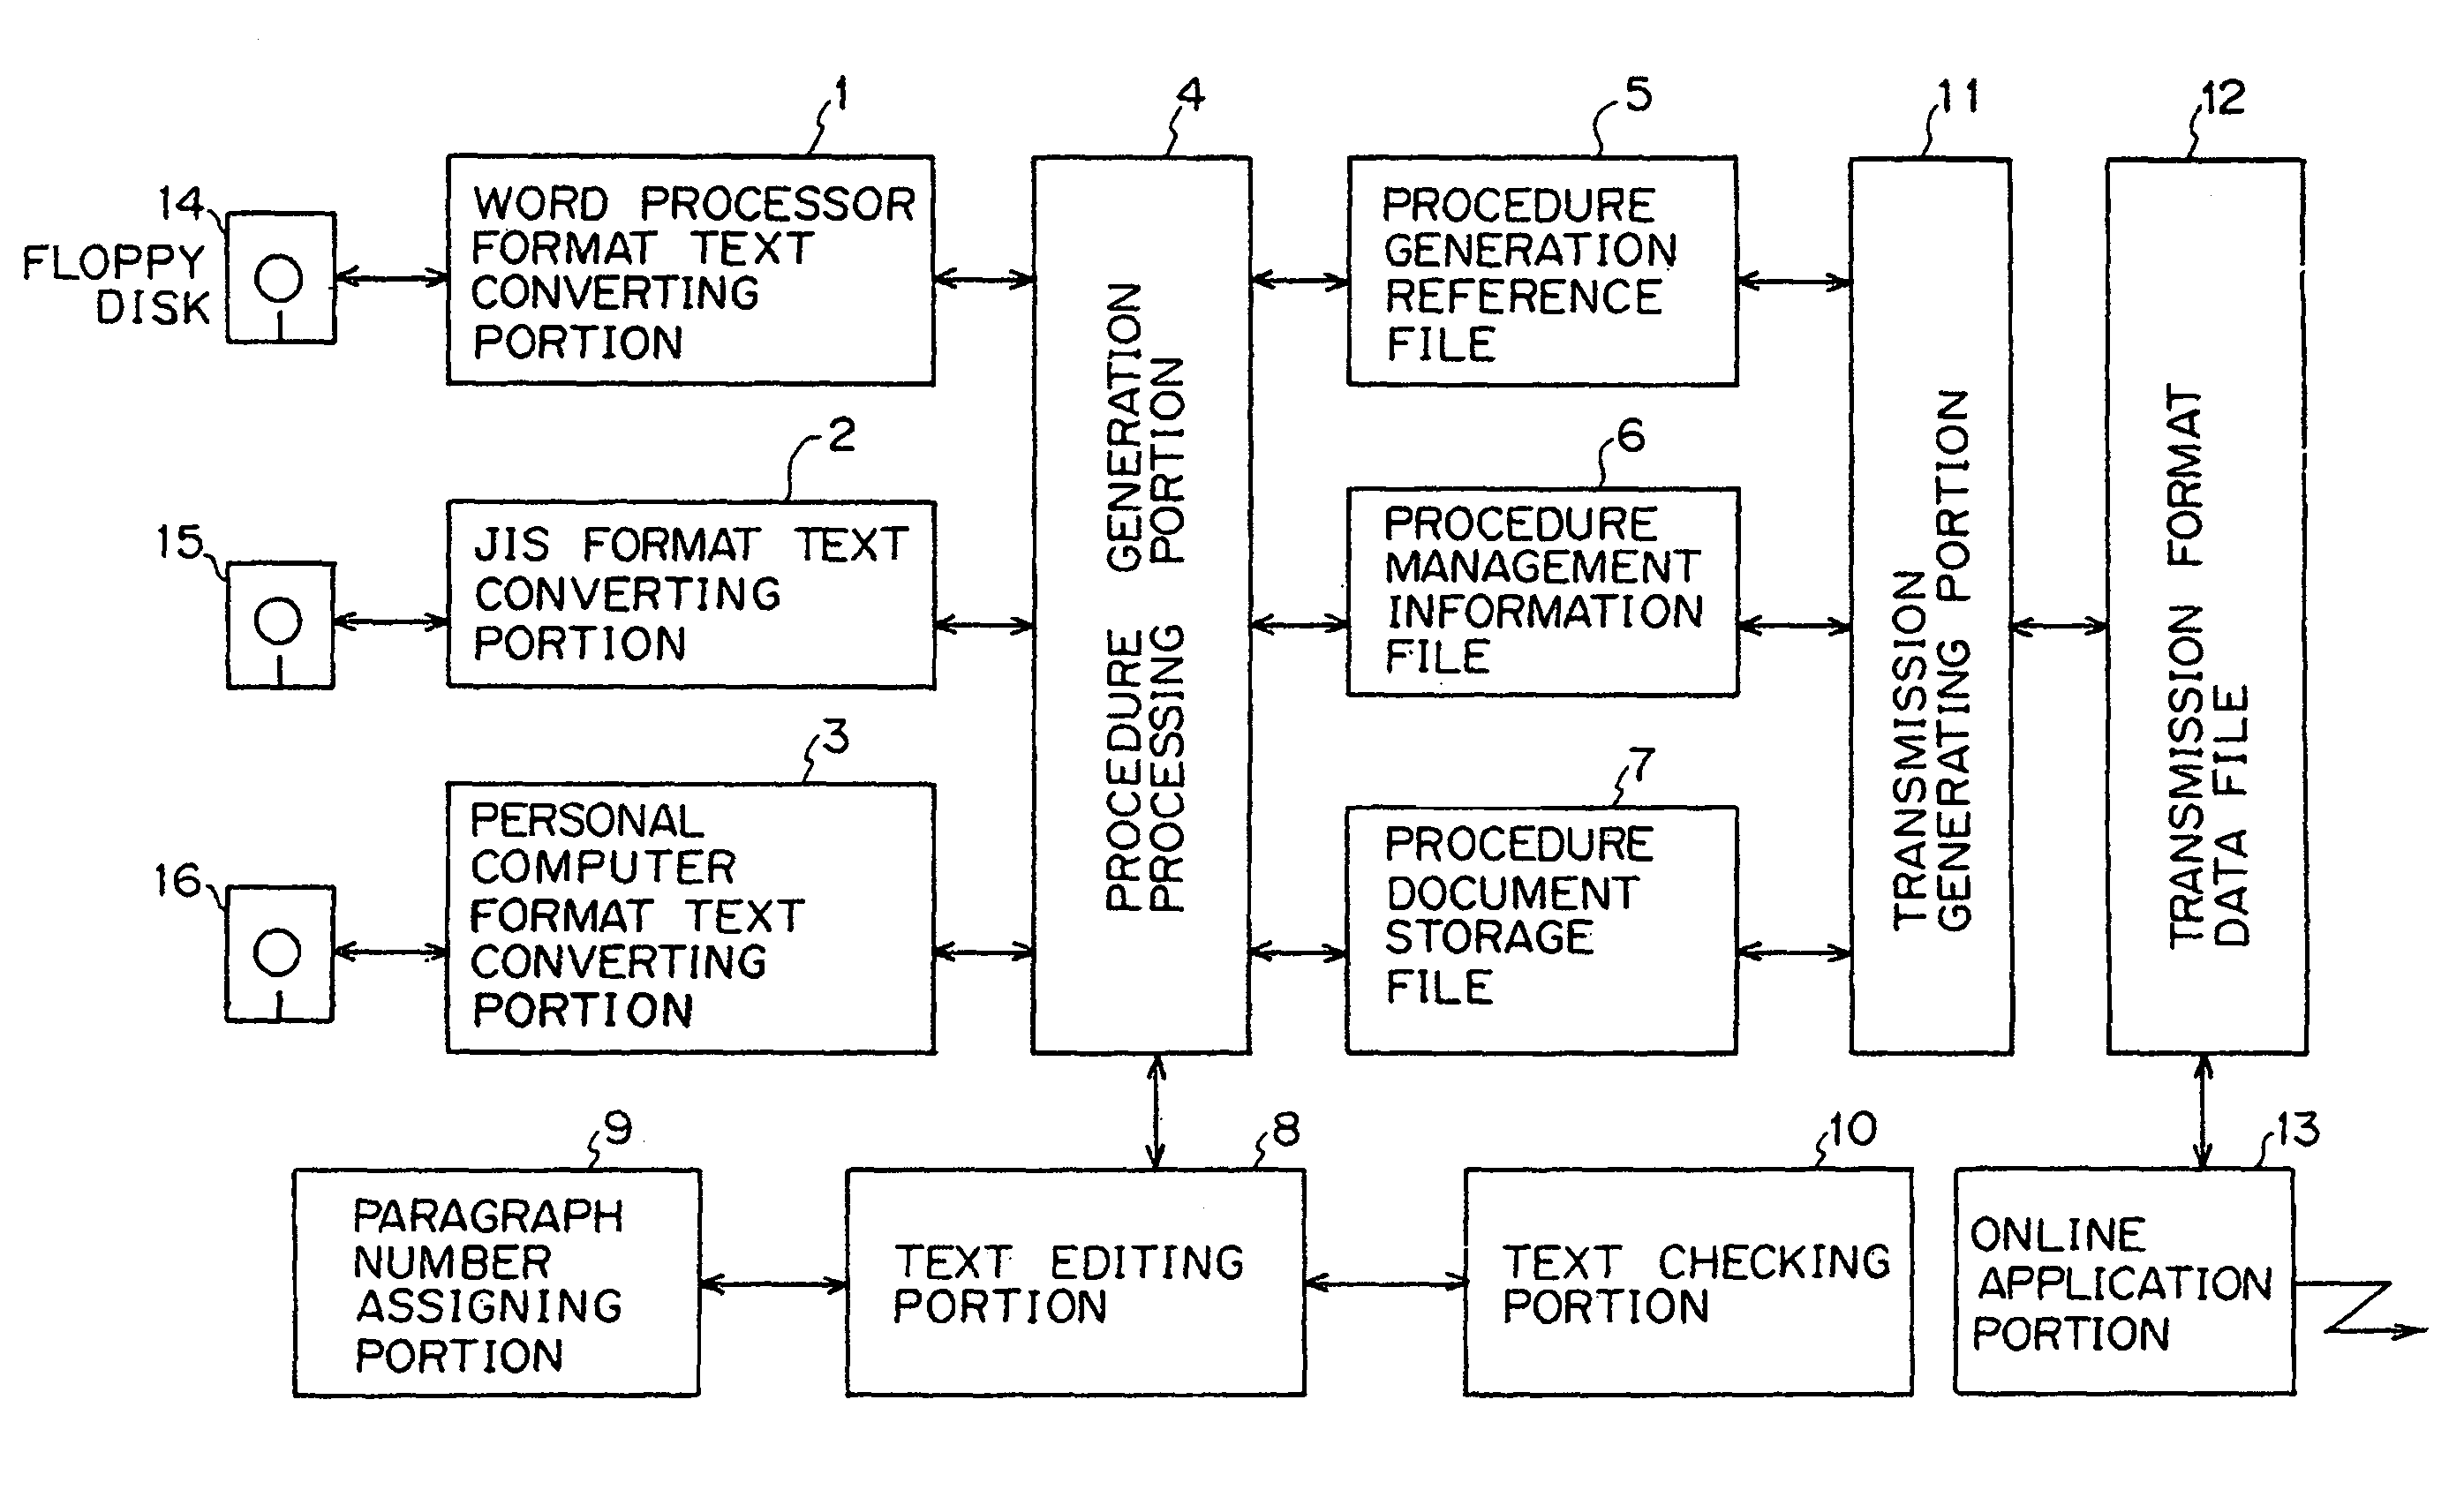 Terminal equipment for merging imaging data and text data, and transmitting and receiving the same on-line